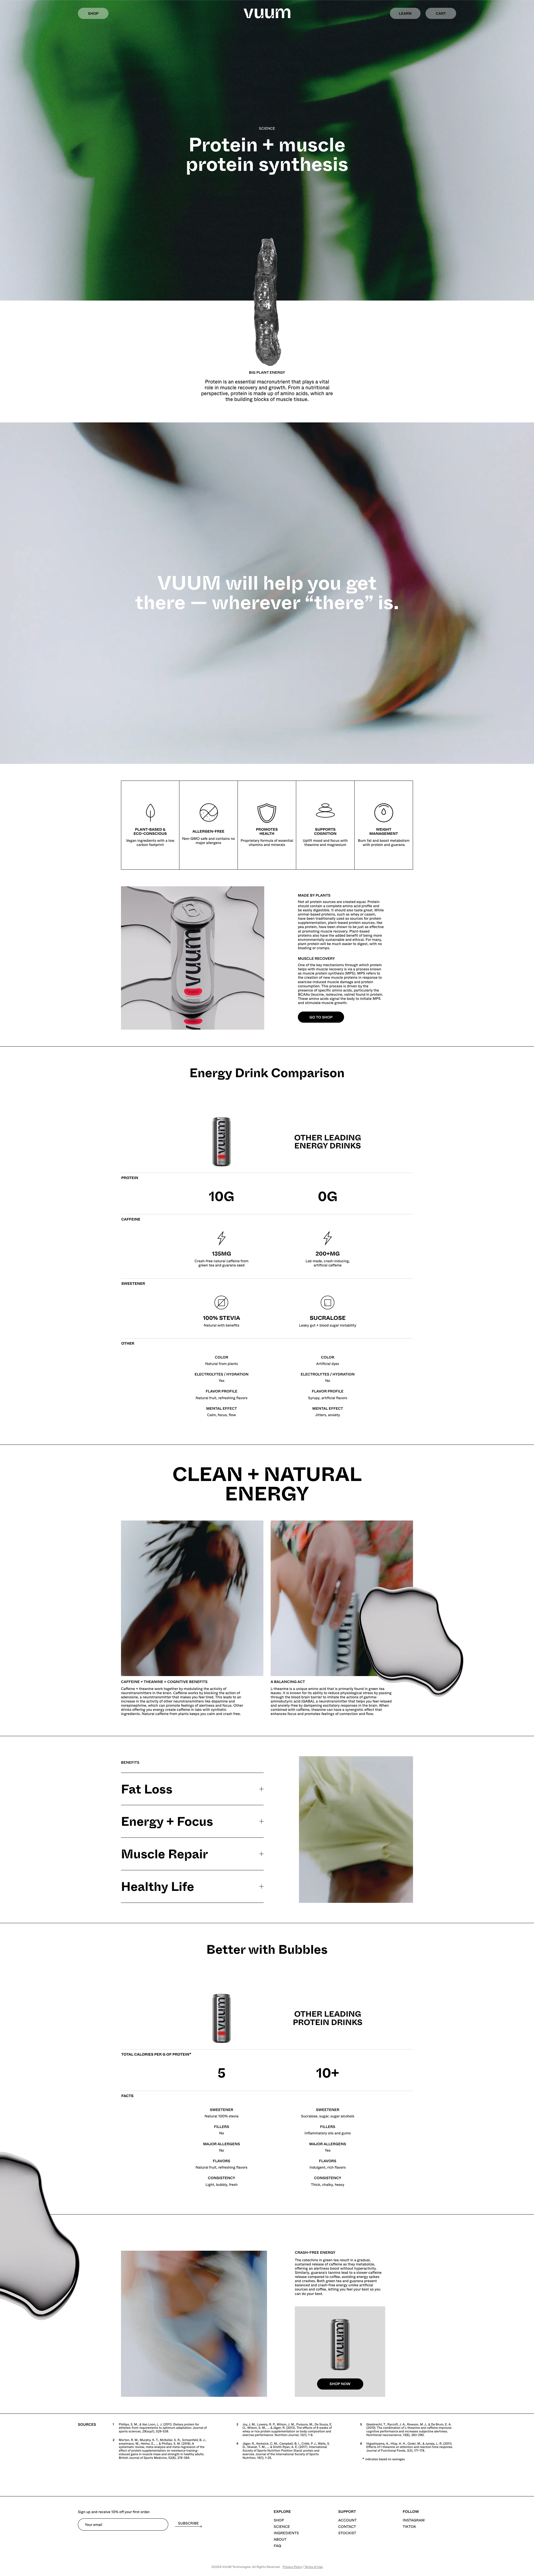 VUUM Landing Page Example: Energy that won't leave you feeling empty. Made from plant protein, without tasting like it. A fresh and bubbly drink that tastes light and fruity. Propelled by natural caffeine that won't make you crash. With minerals, vitamins, amino acids, and zero artificial sweeteners. Vegan and stomach friendly . A pick me up that will leave you feeling good all day, and tomorrow.